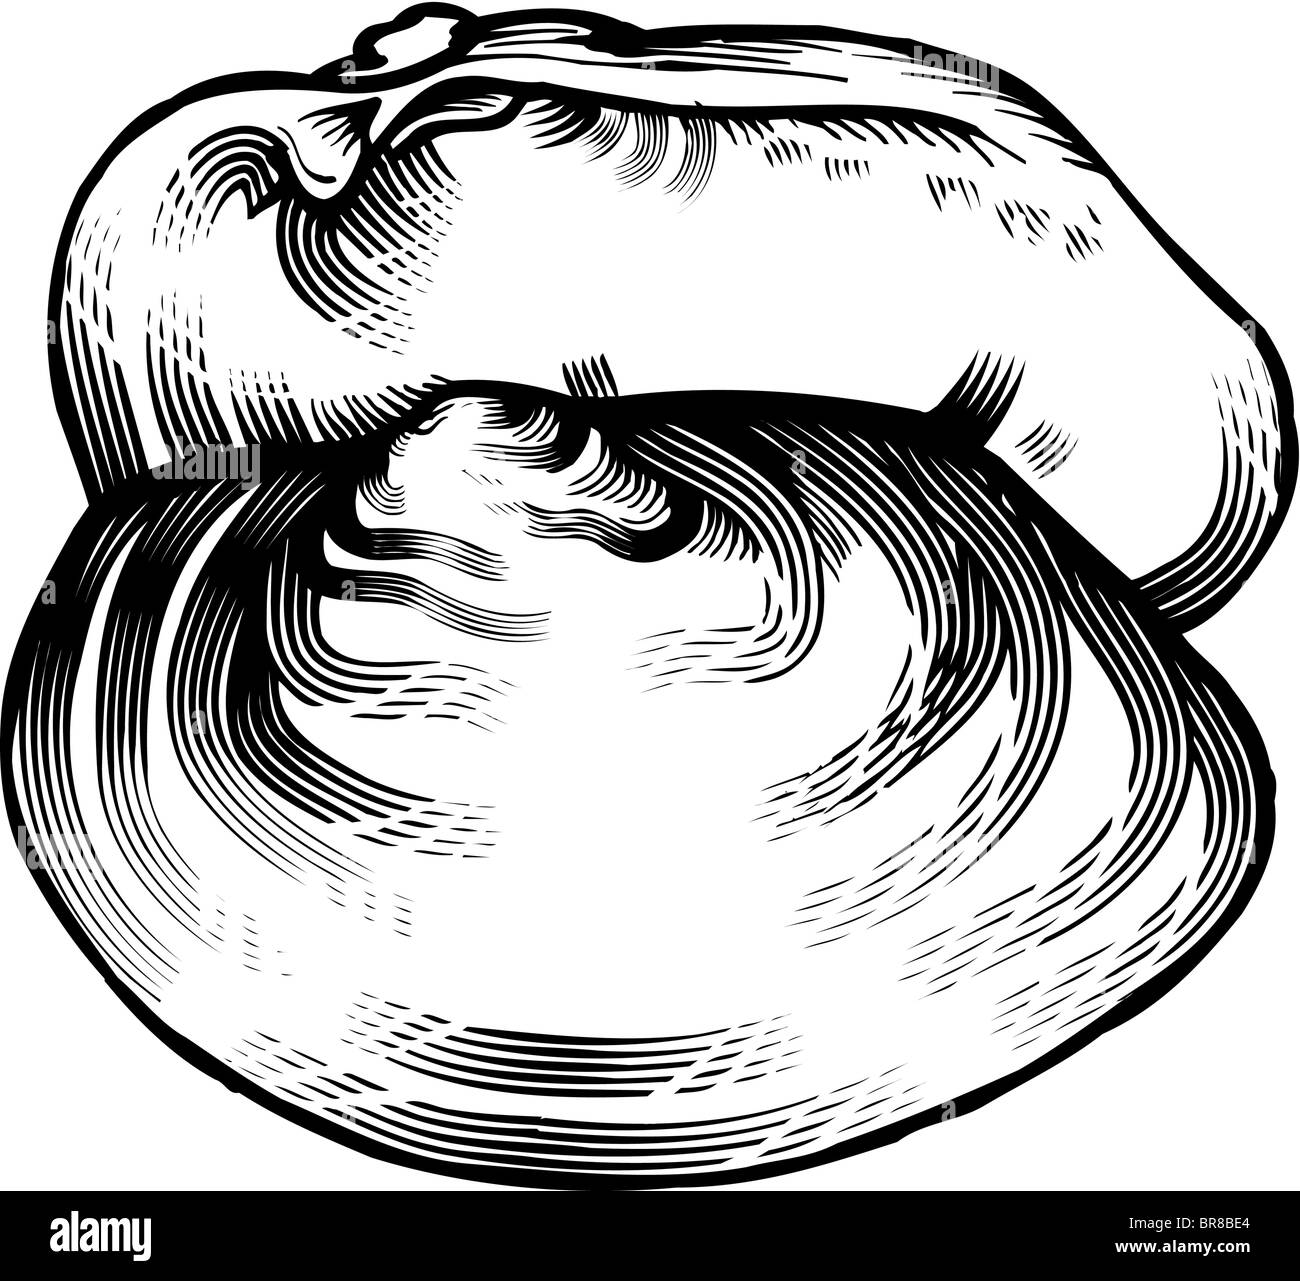 A black and white drawing of a clam Stock Photo